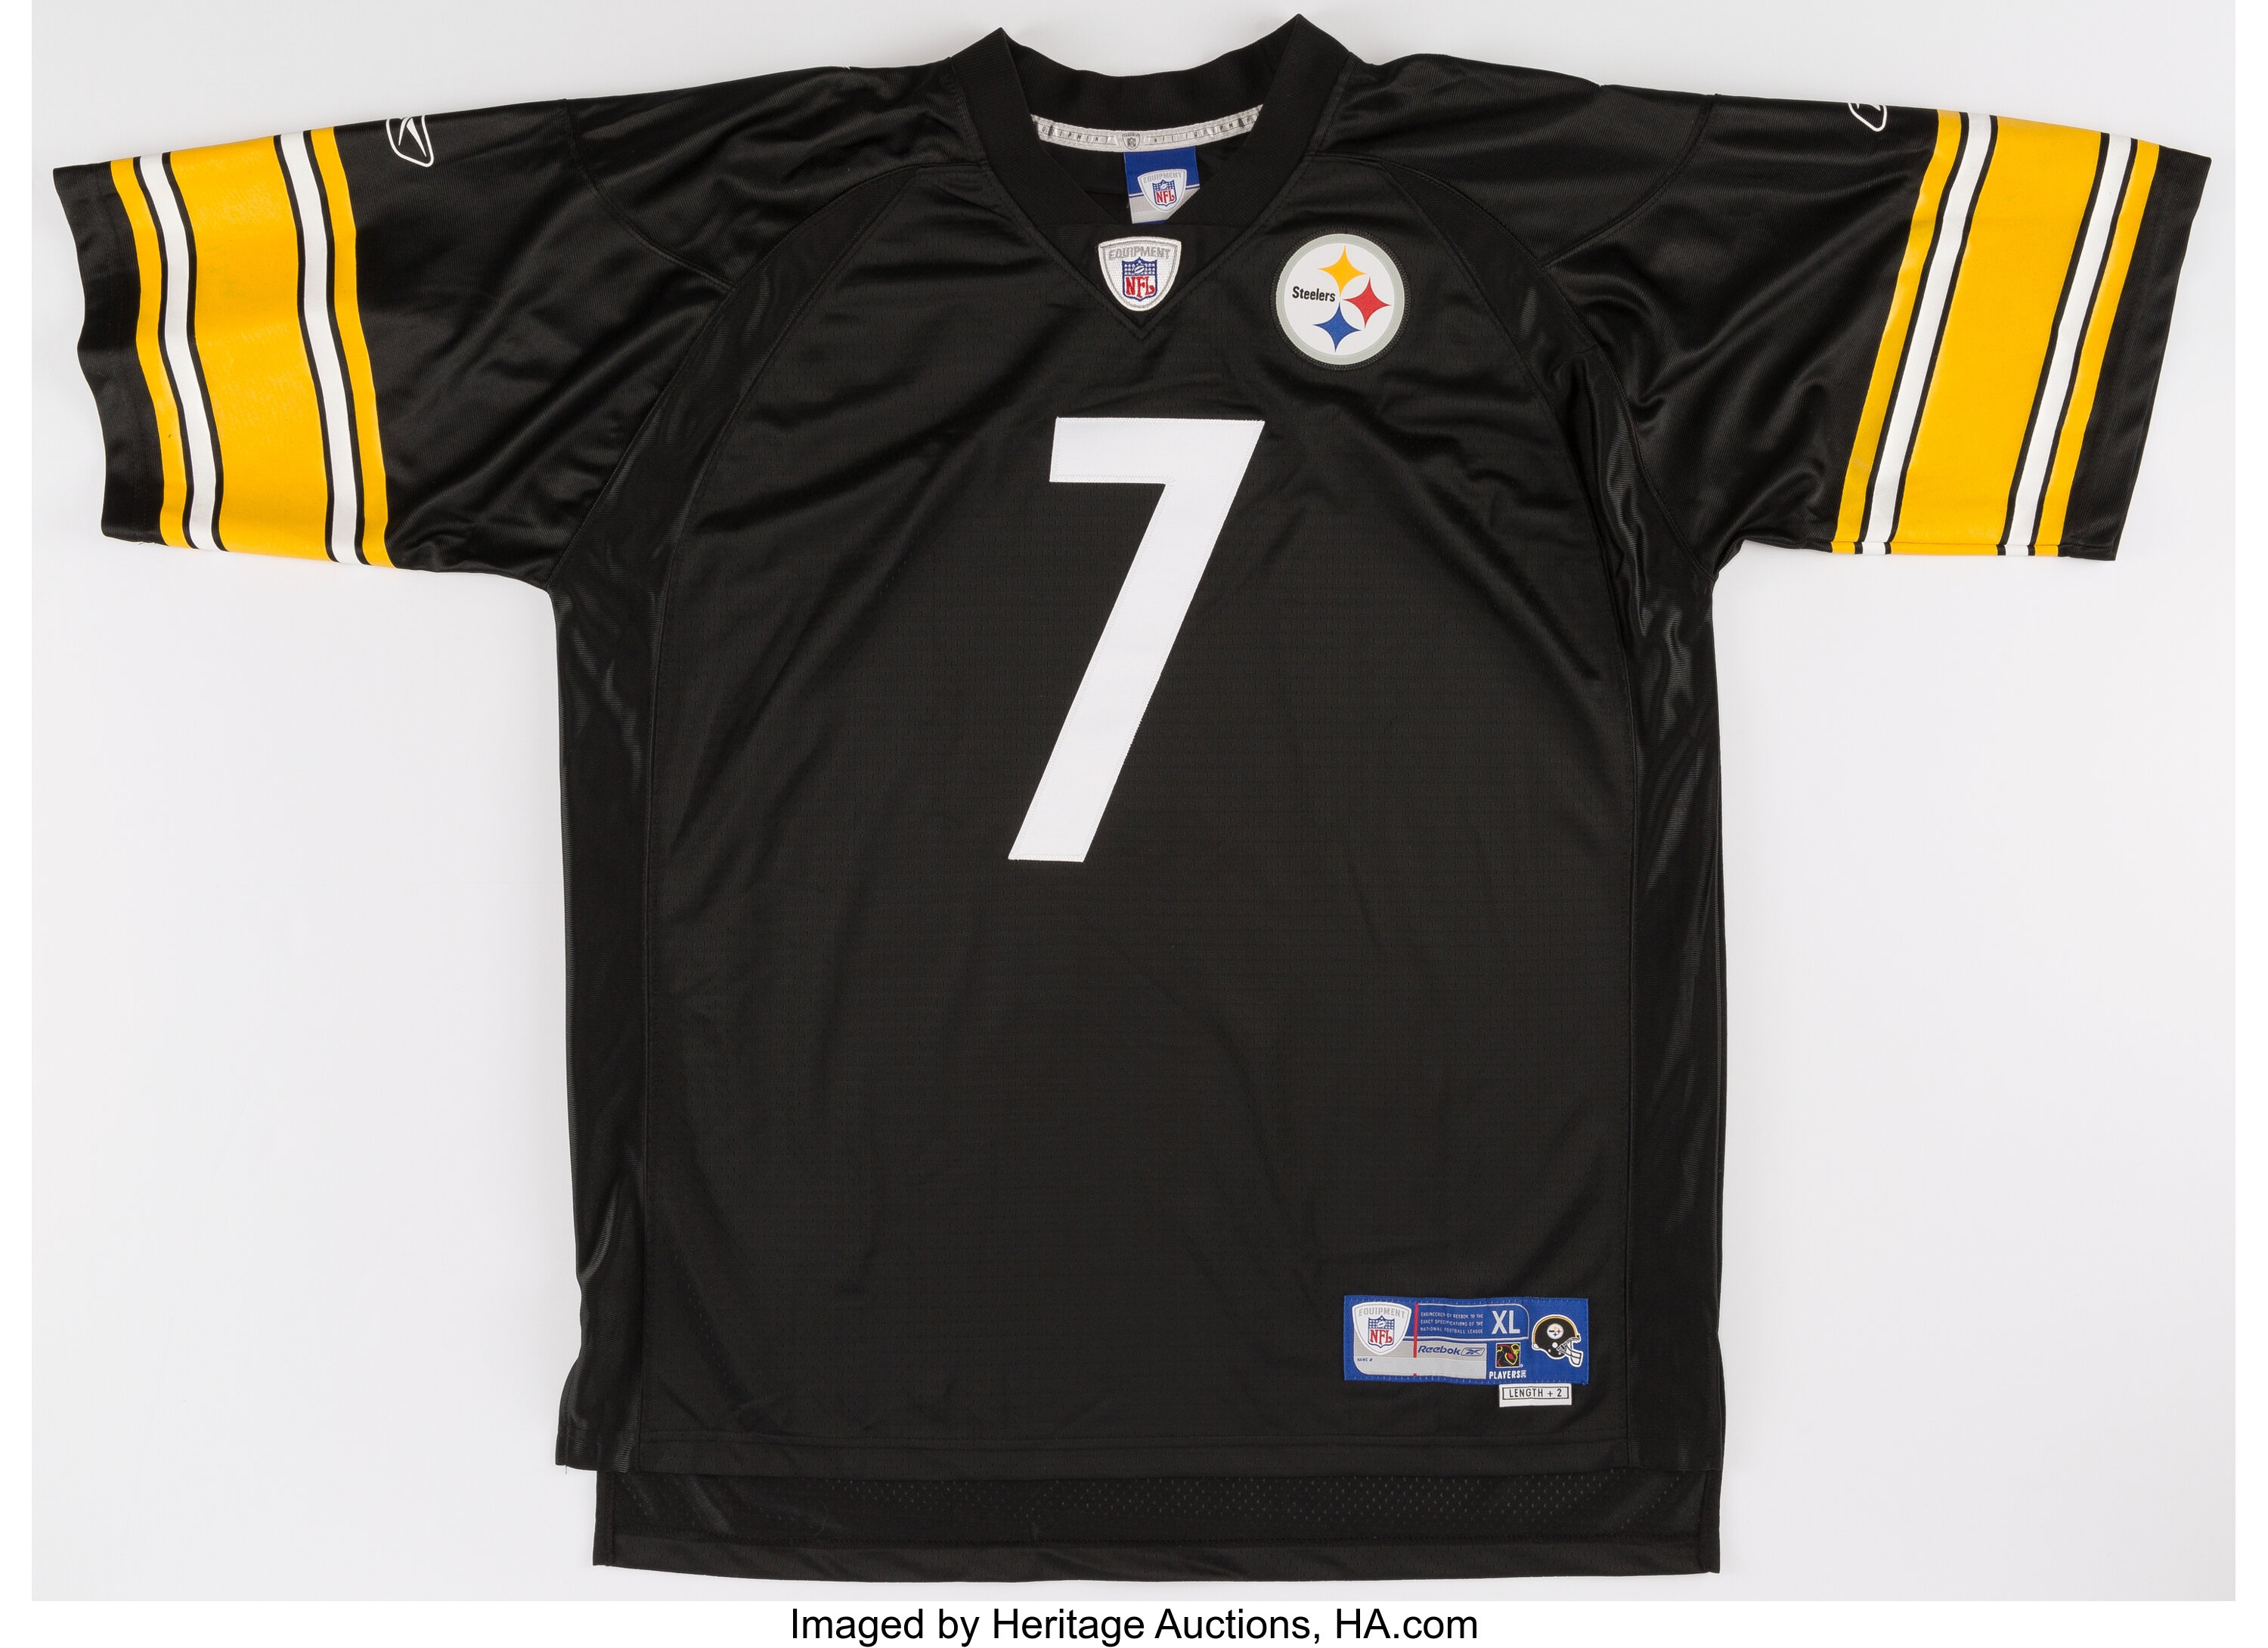 Ben Roethlisberger Signed Pittsburgh Steelers Jersey Football Lot 43105 Heritage Auctions